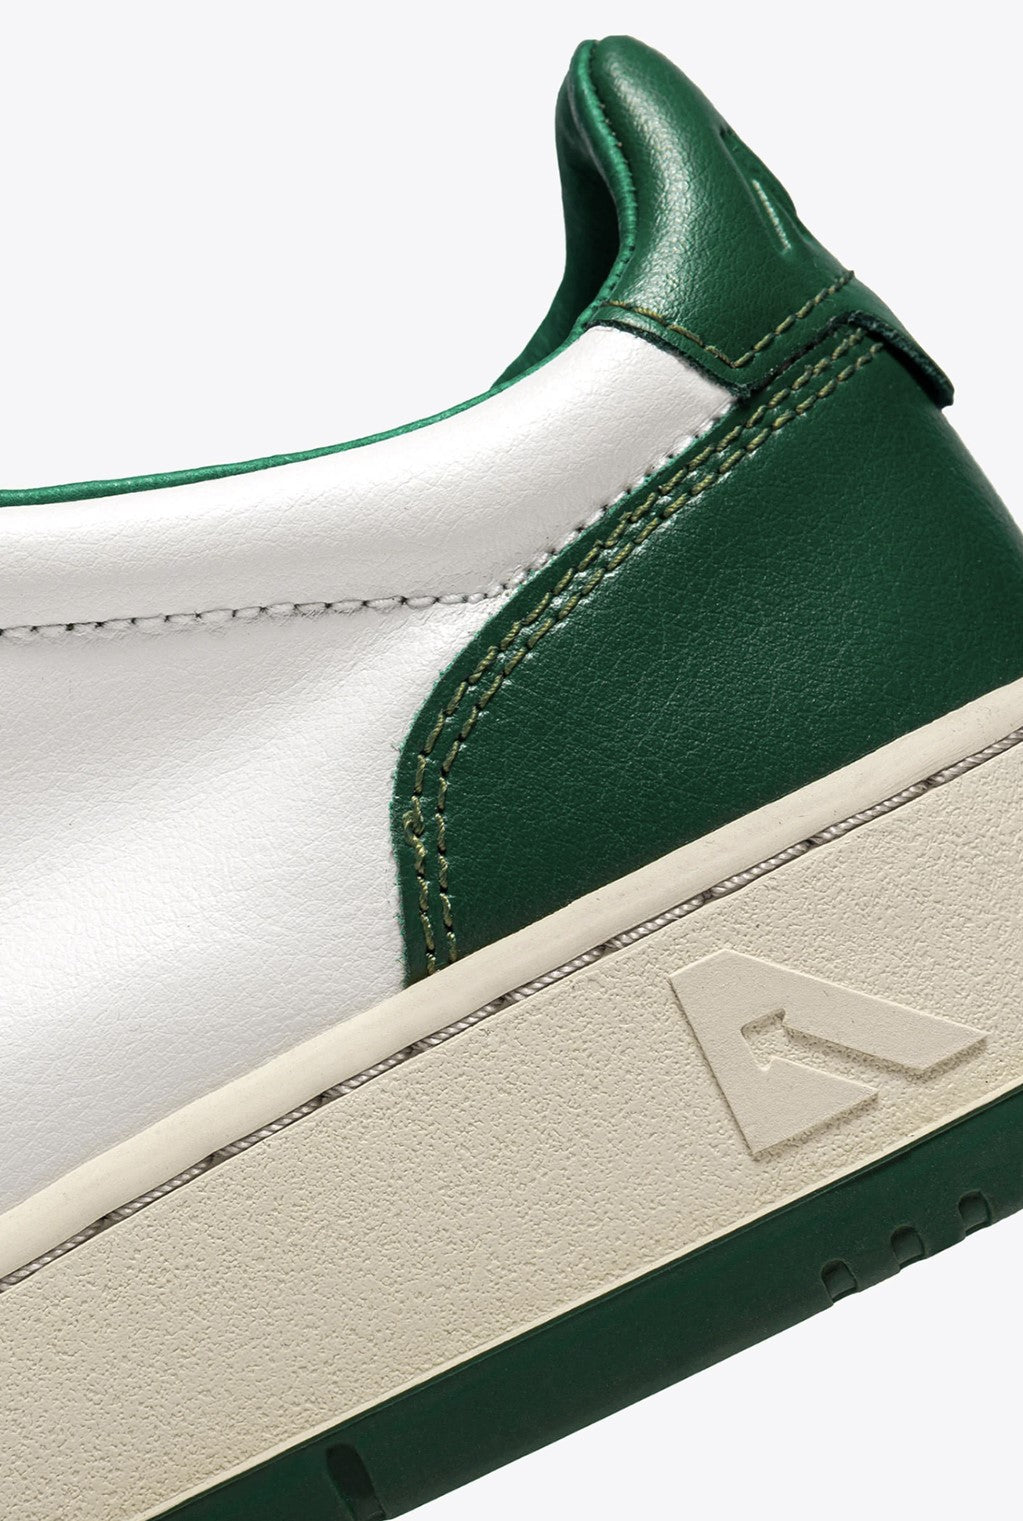 alt-image__Green-and-white-leather-low-sneaker---Medalist